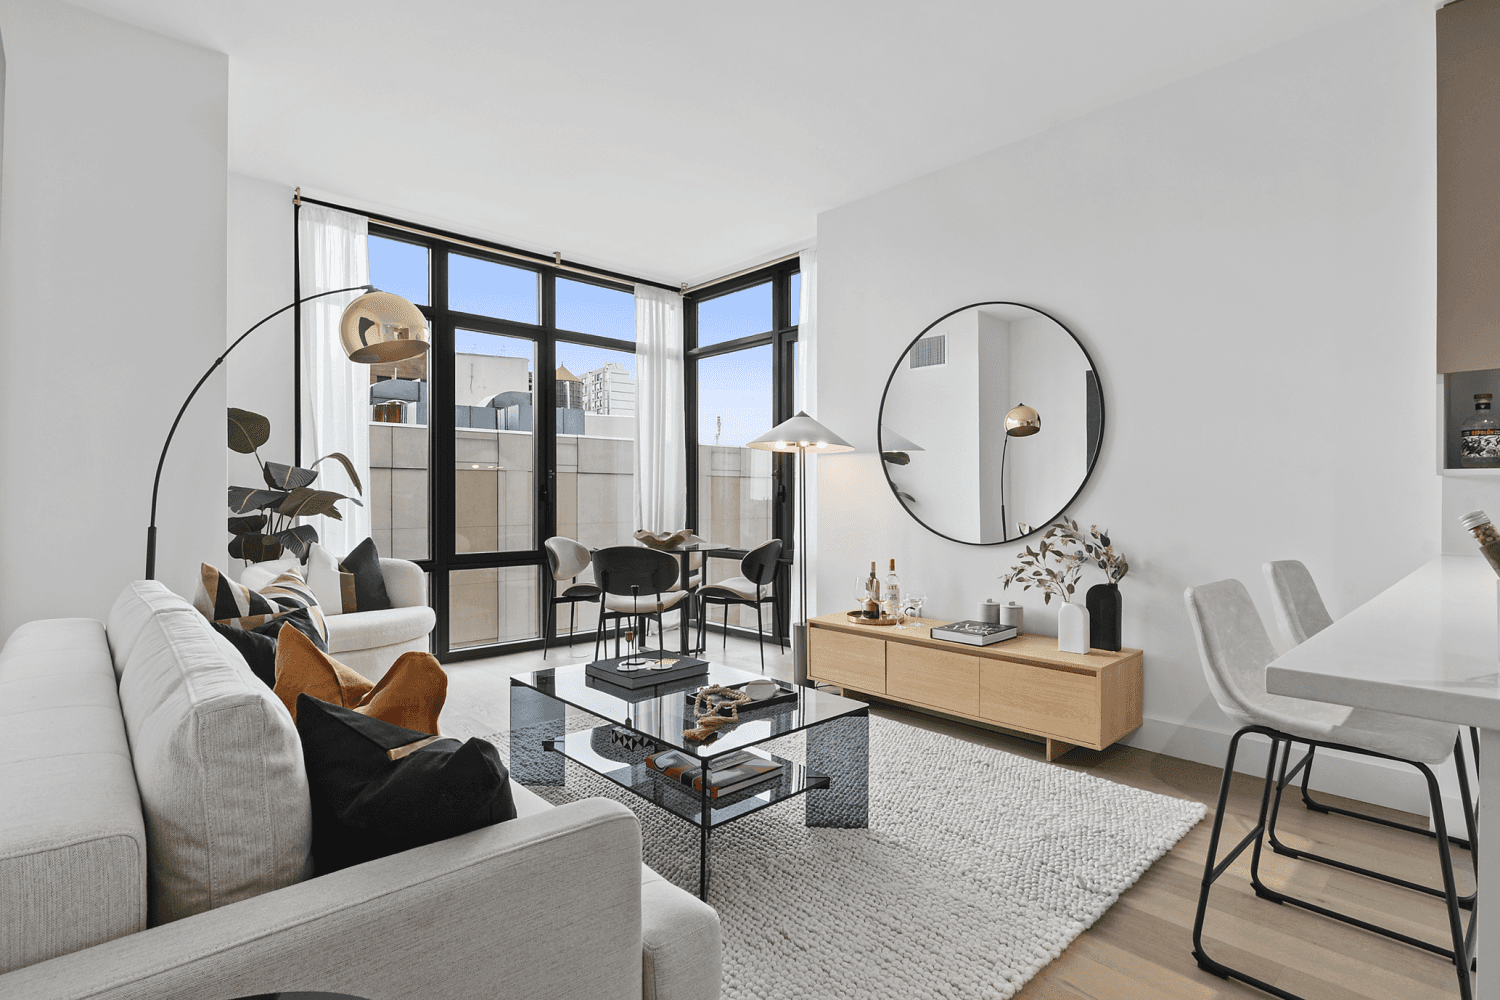 All Roads Lead to Home. Experience connectivity, convenience and an elevated rental experience at One Archer in the heart of downtown Jamaica, Queens.